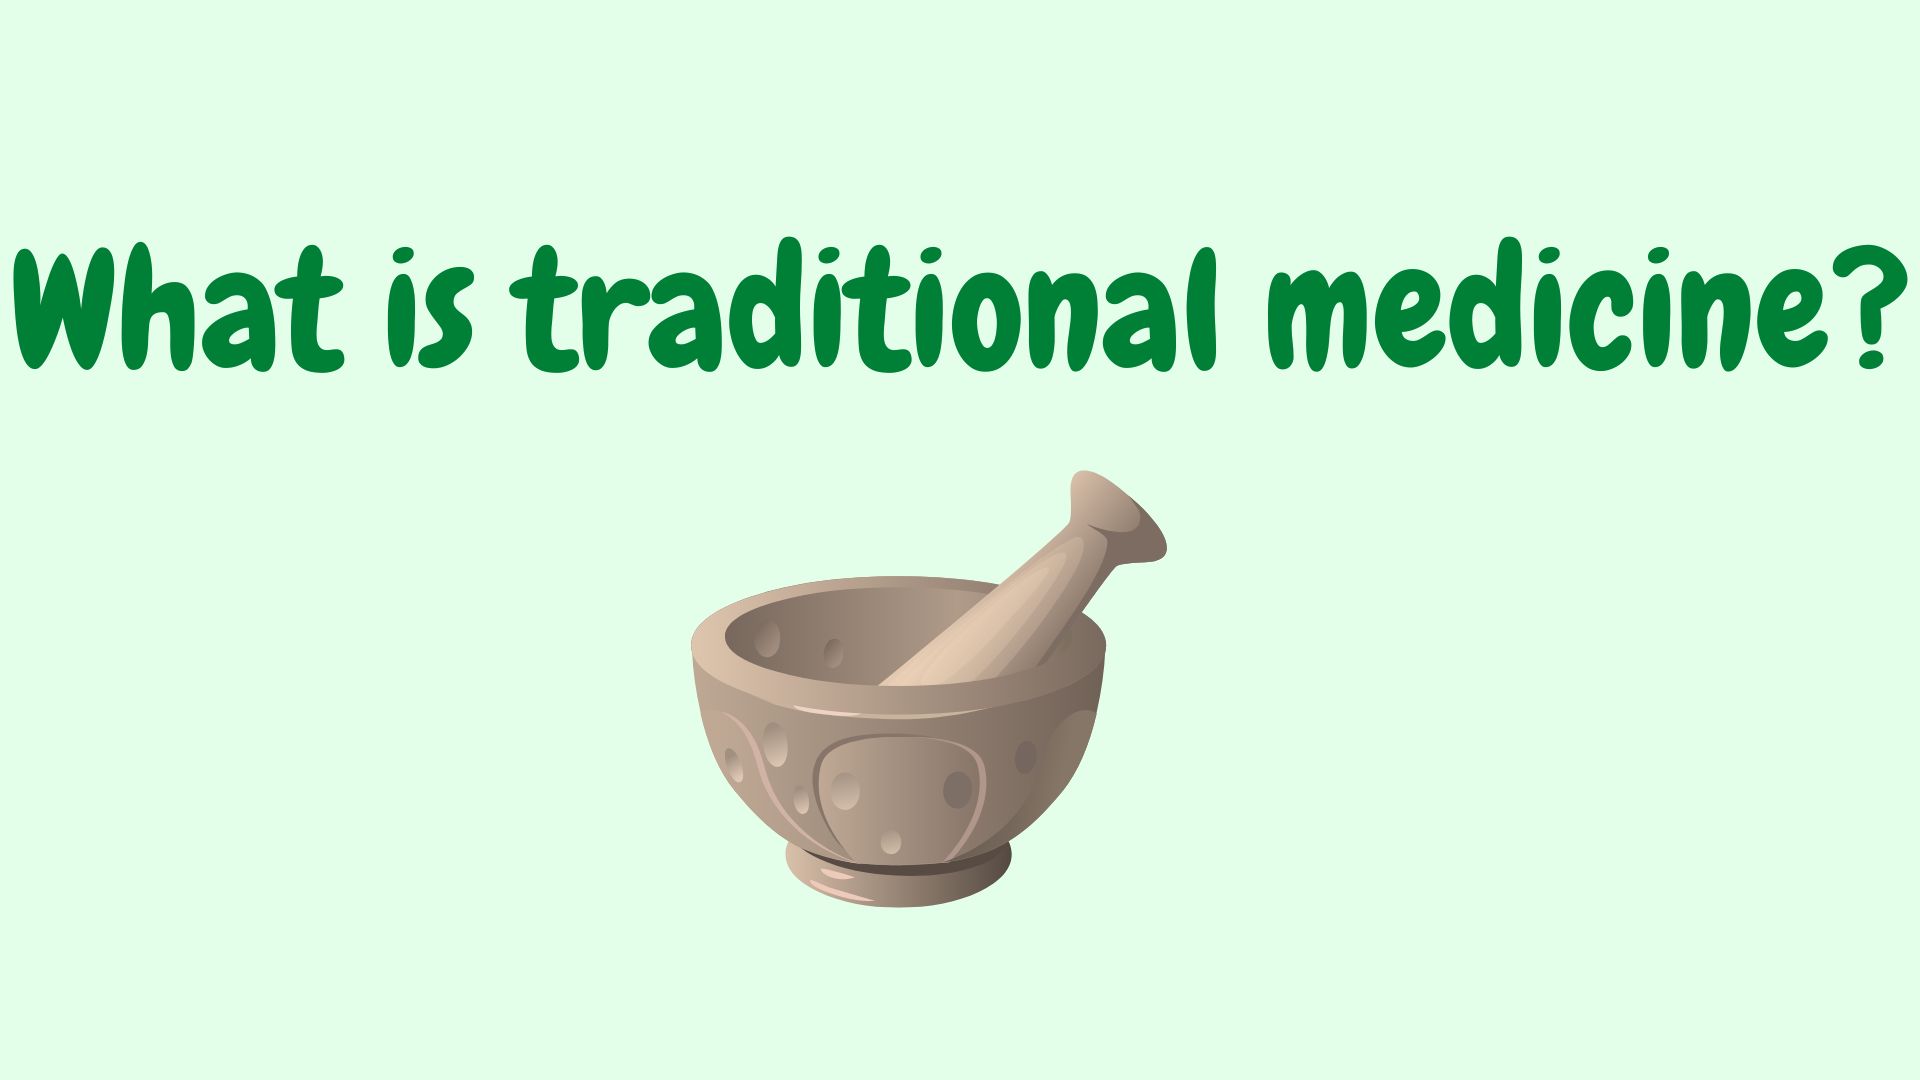 What is the history of traditional medicine?